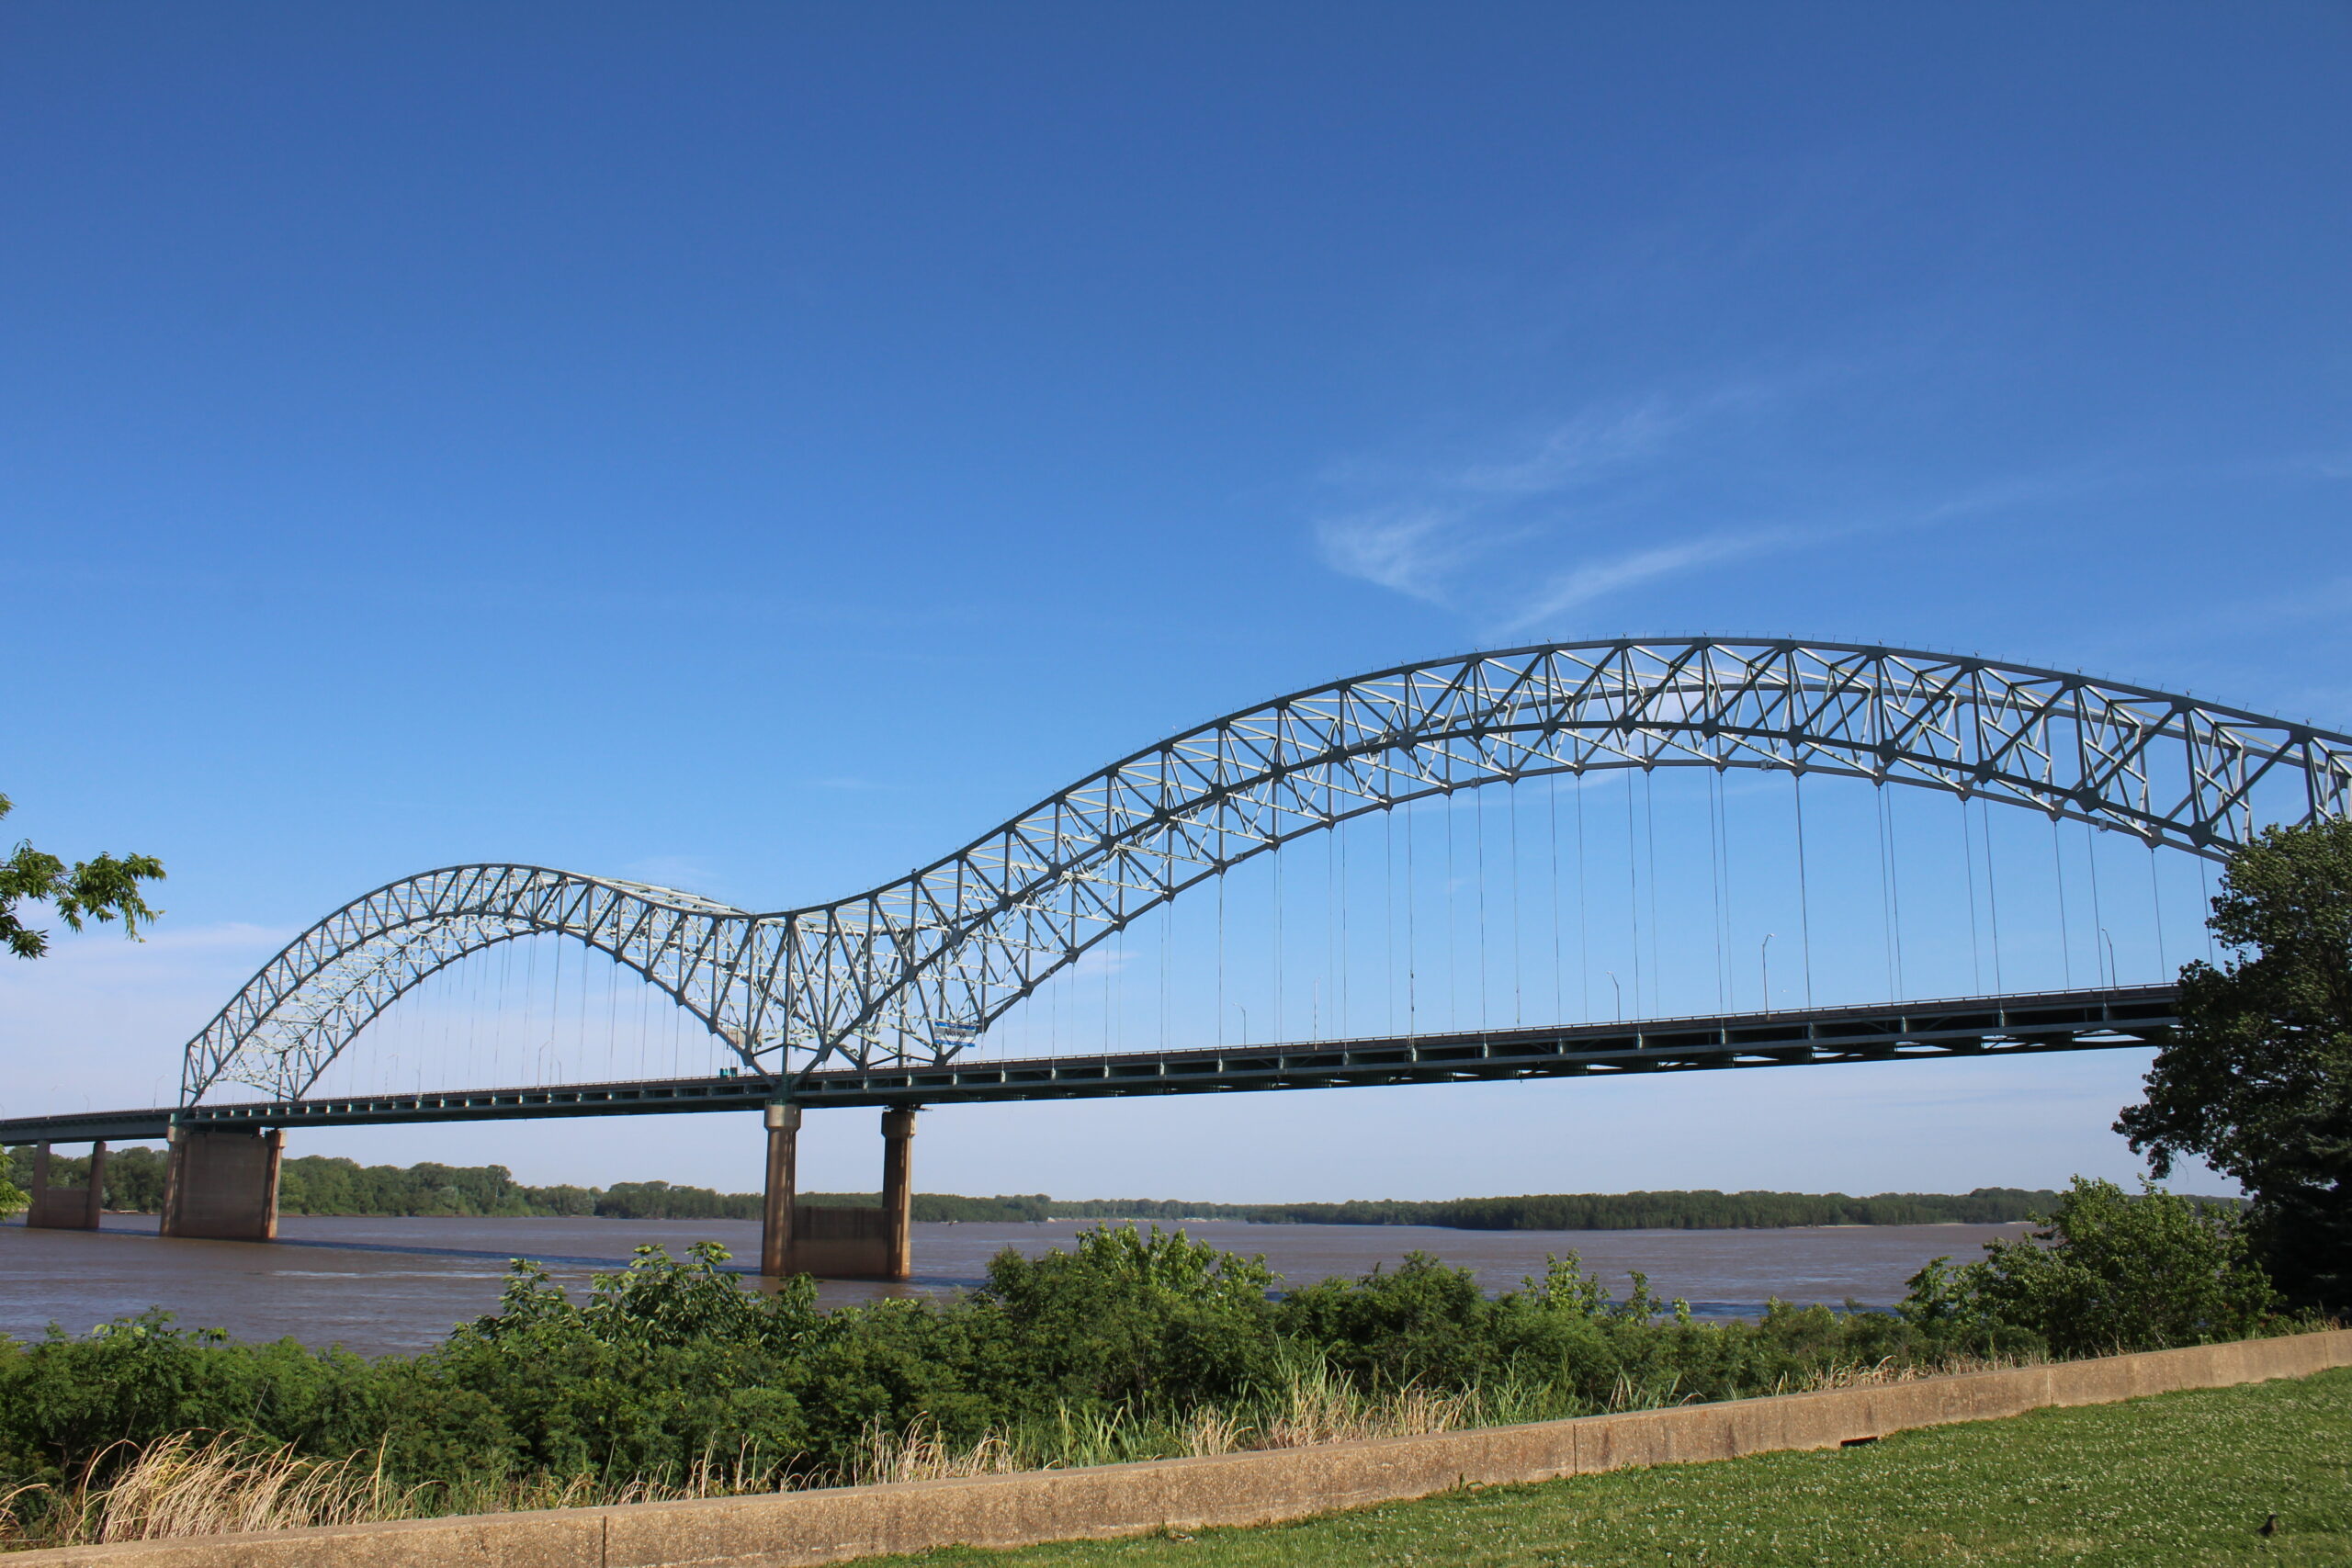 A crack in a steel beam, found the day before, has forced the closure of the Interstate 40 bridge that connects Arkansas and Tennessee, Wednesday, May 12, 2021, in Memphis, Tenn.